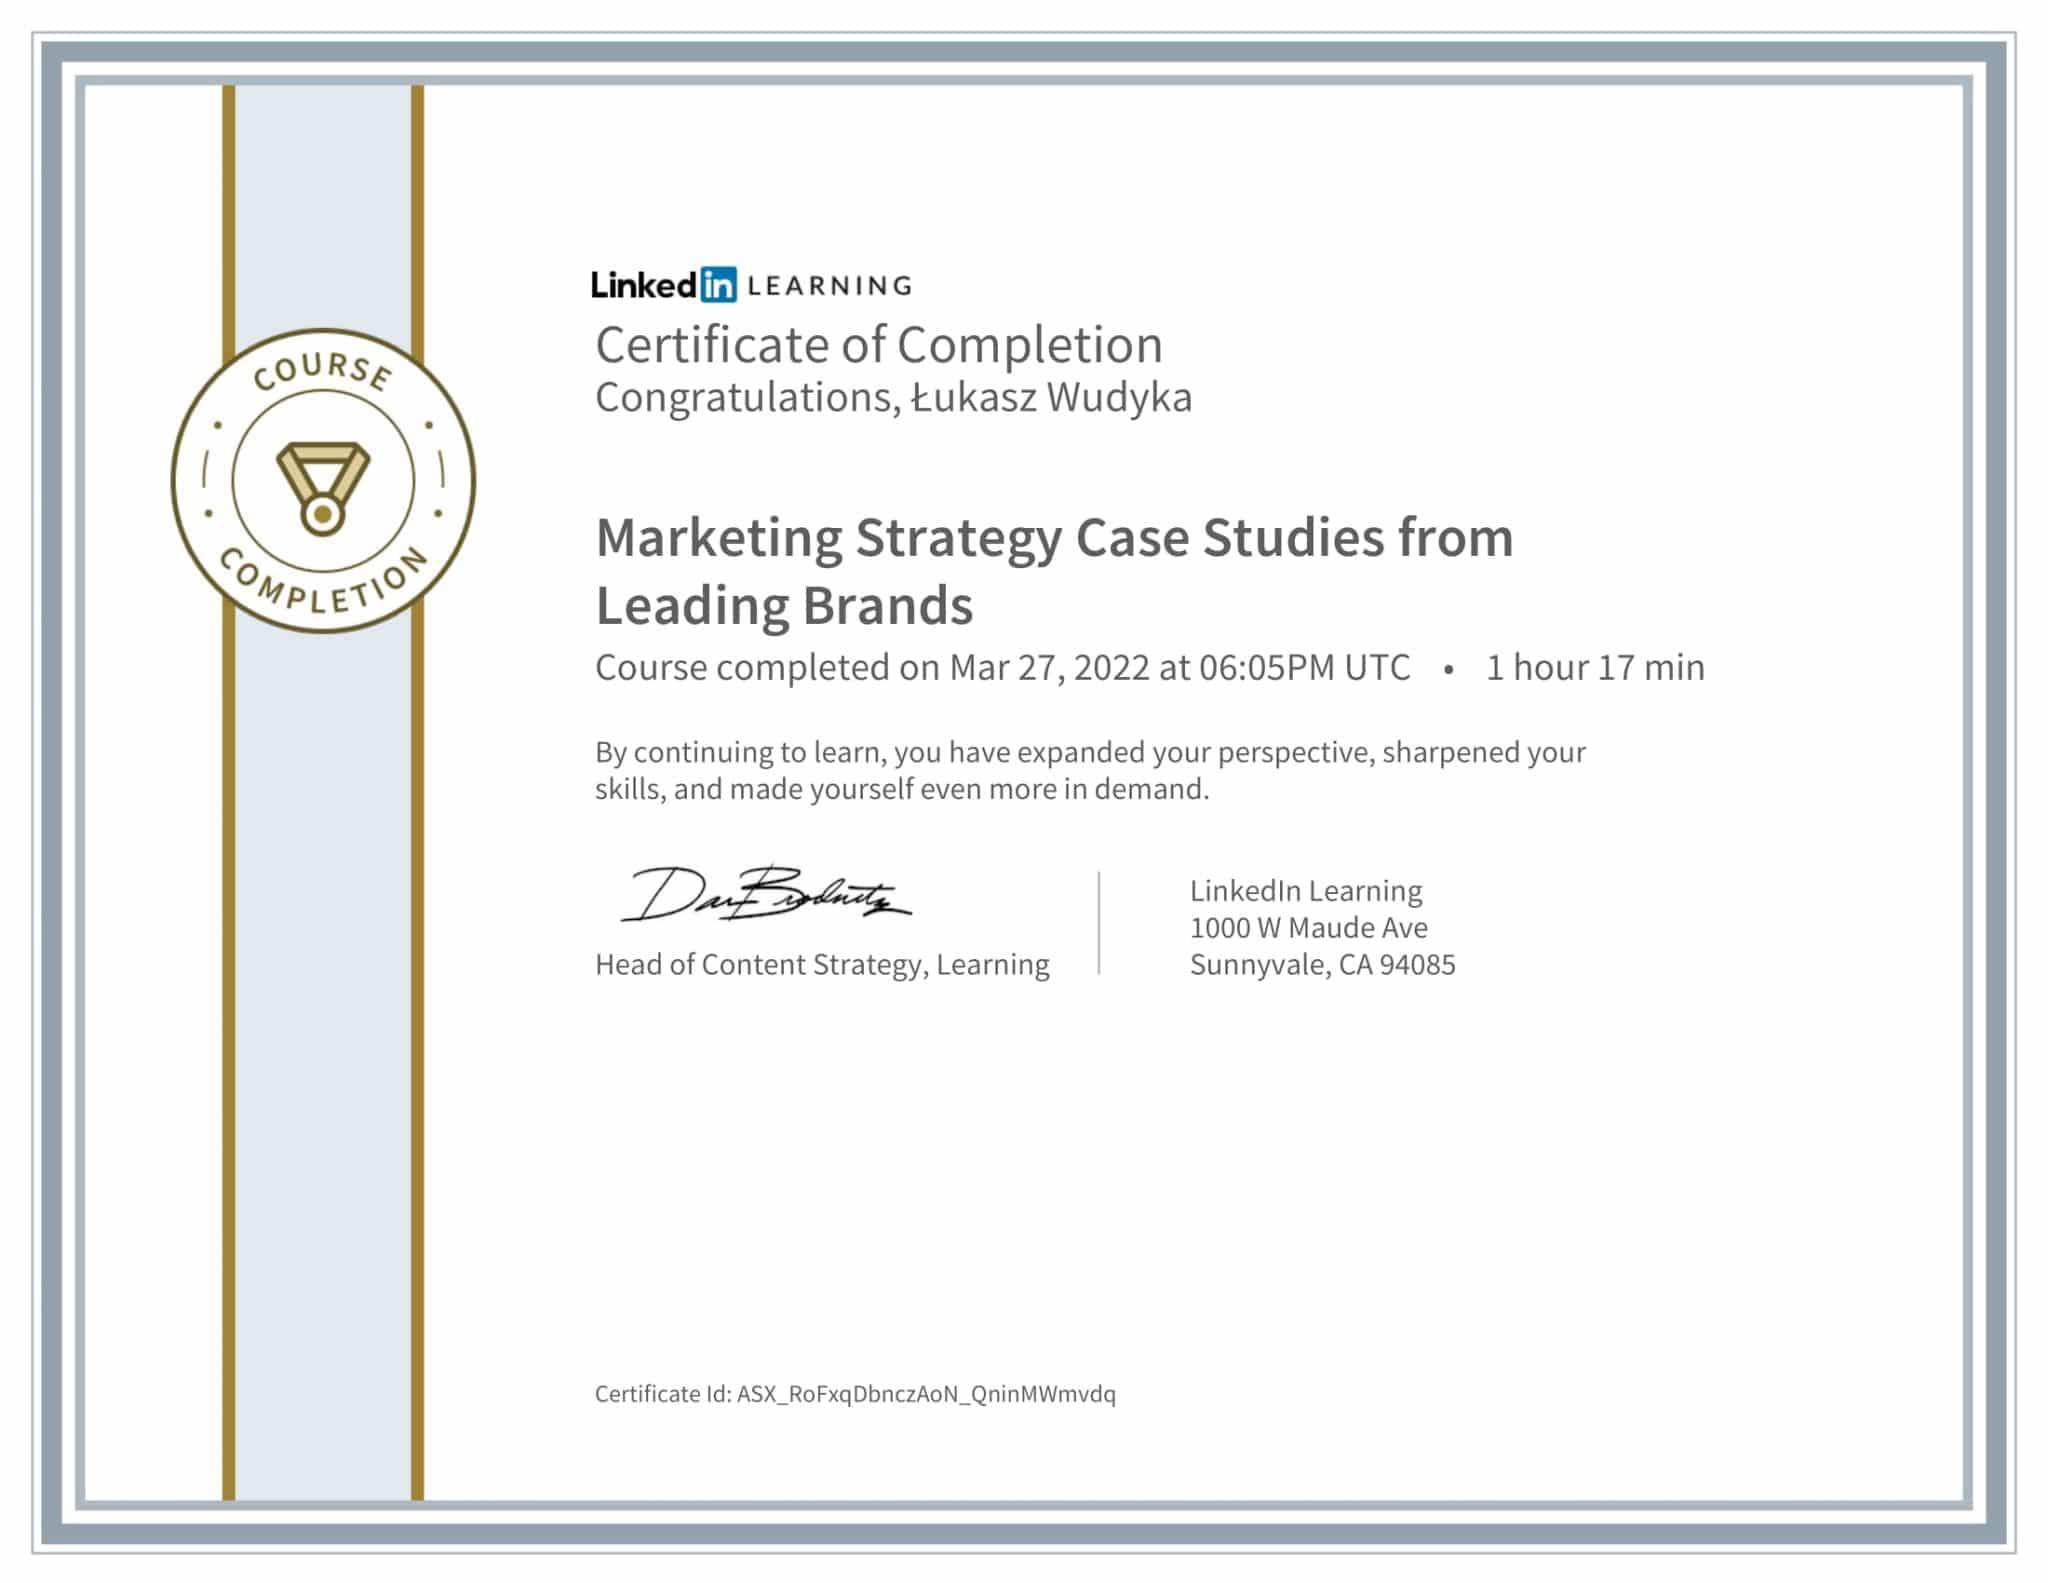 CertificateOfCompletion_Marketing Strategy Case Studies from Leading Brands-1